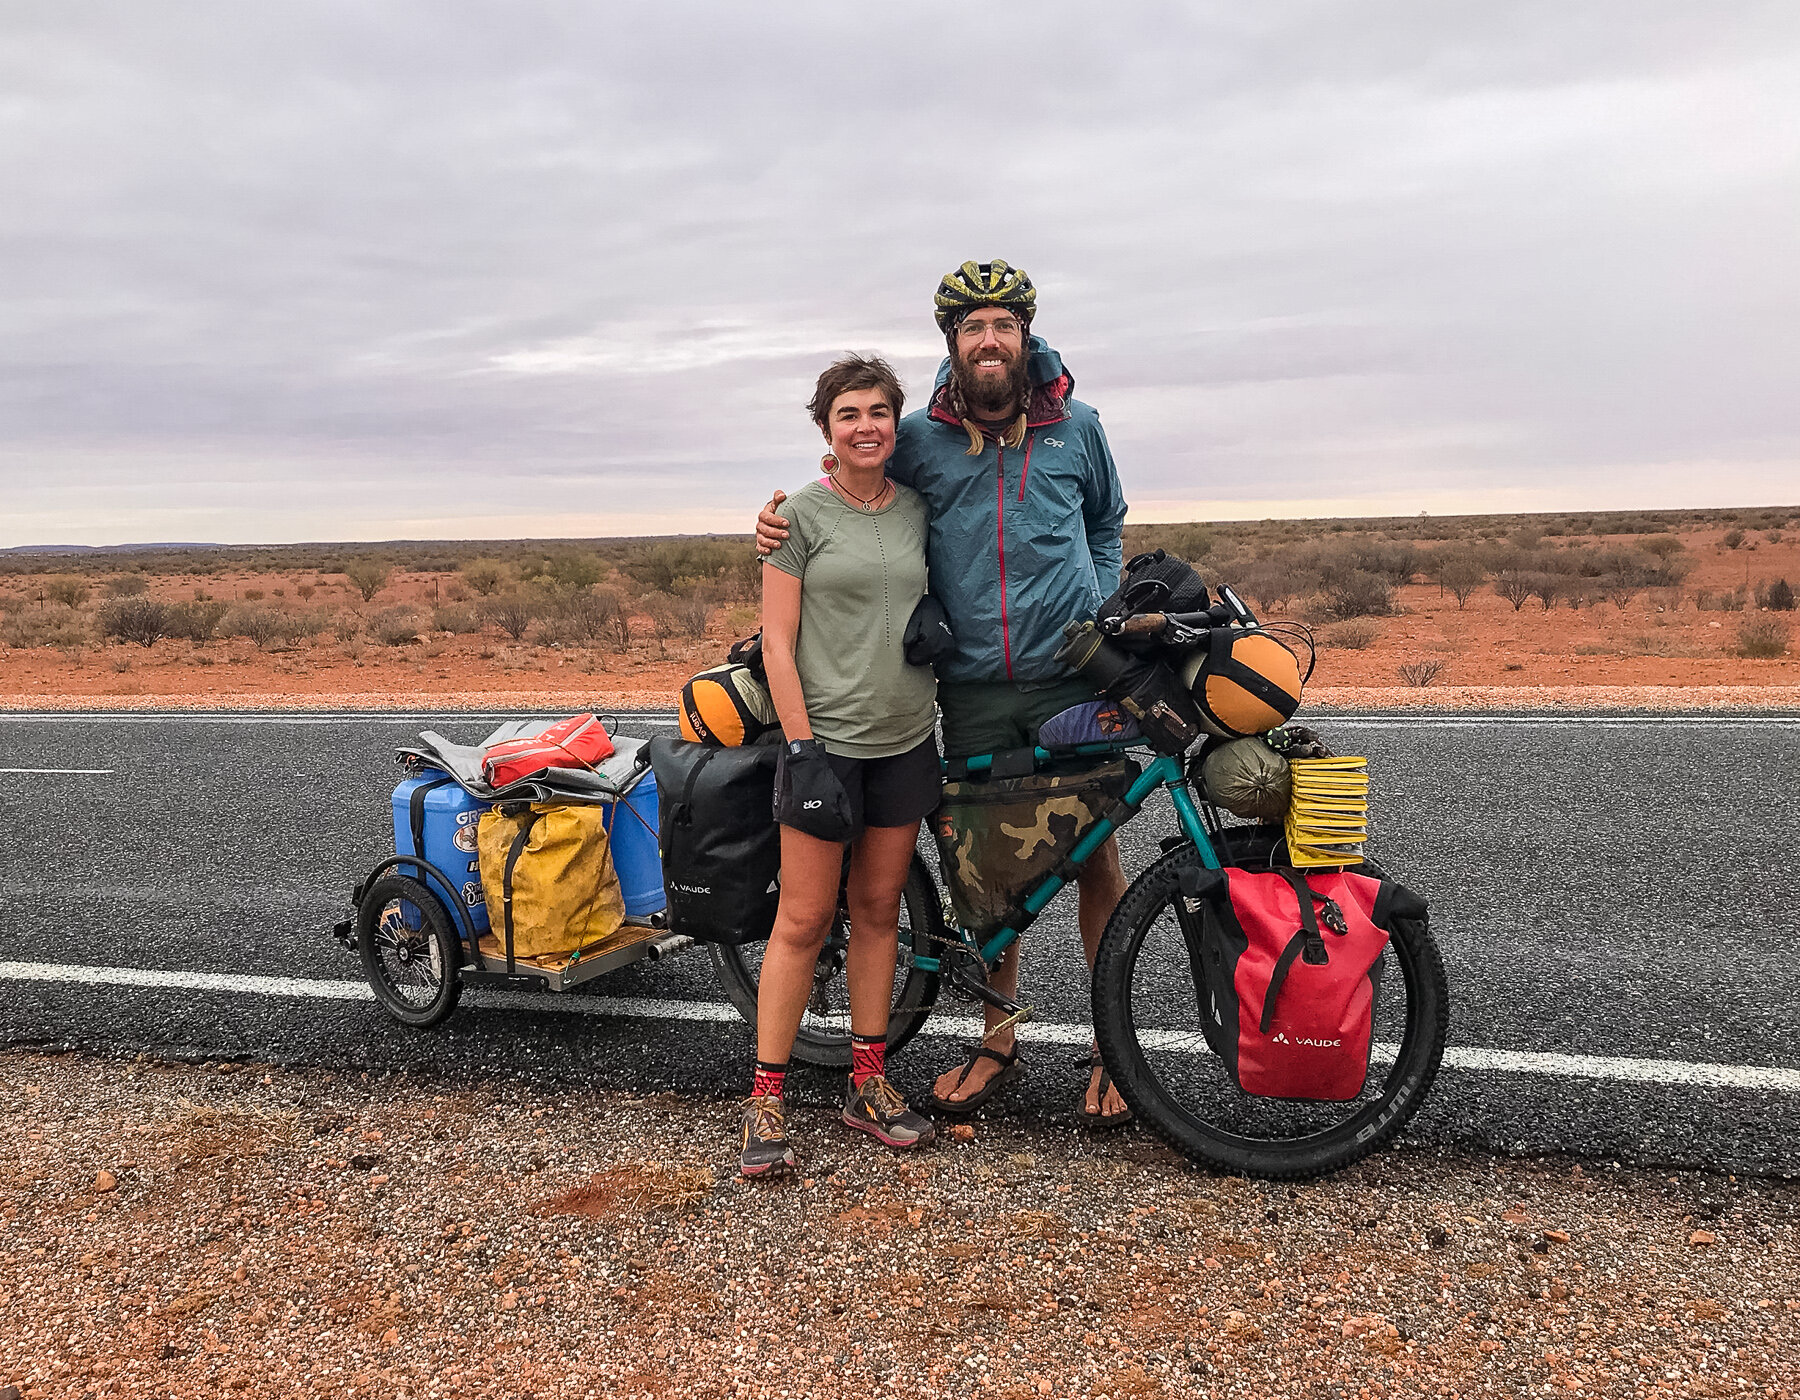  Respect!&nbsp;    What an amazing story! This woman (Katie) was running across Australia, and her husband was carrying all the water and food for her. That is such a display of dedication and love. It is an inspiration to see people going after thei